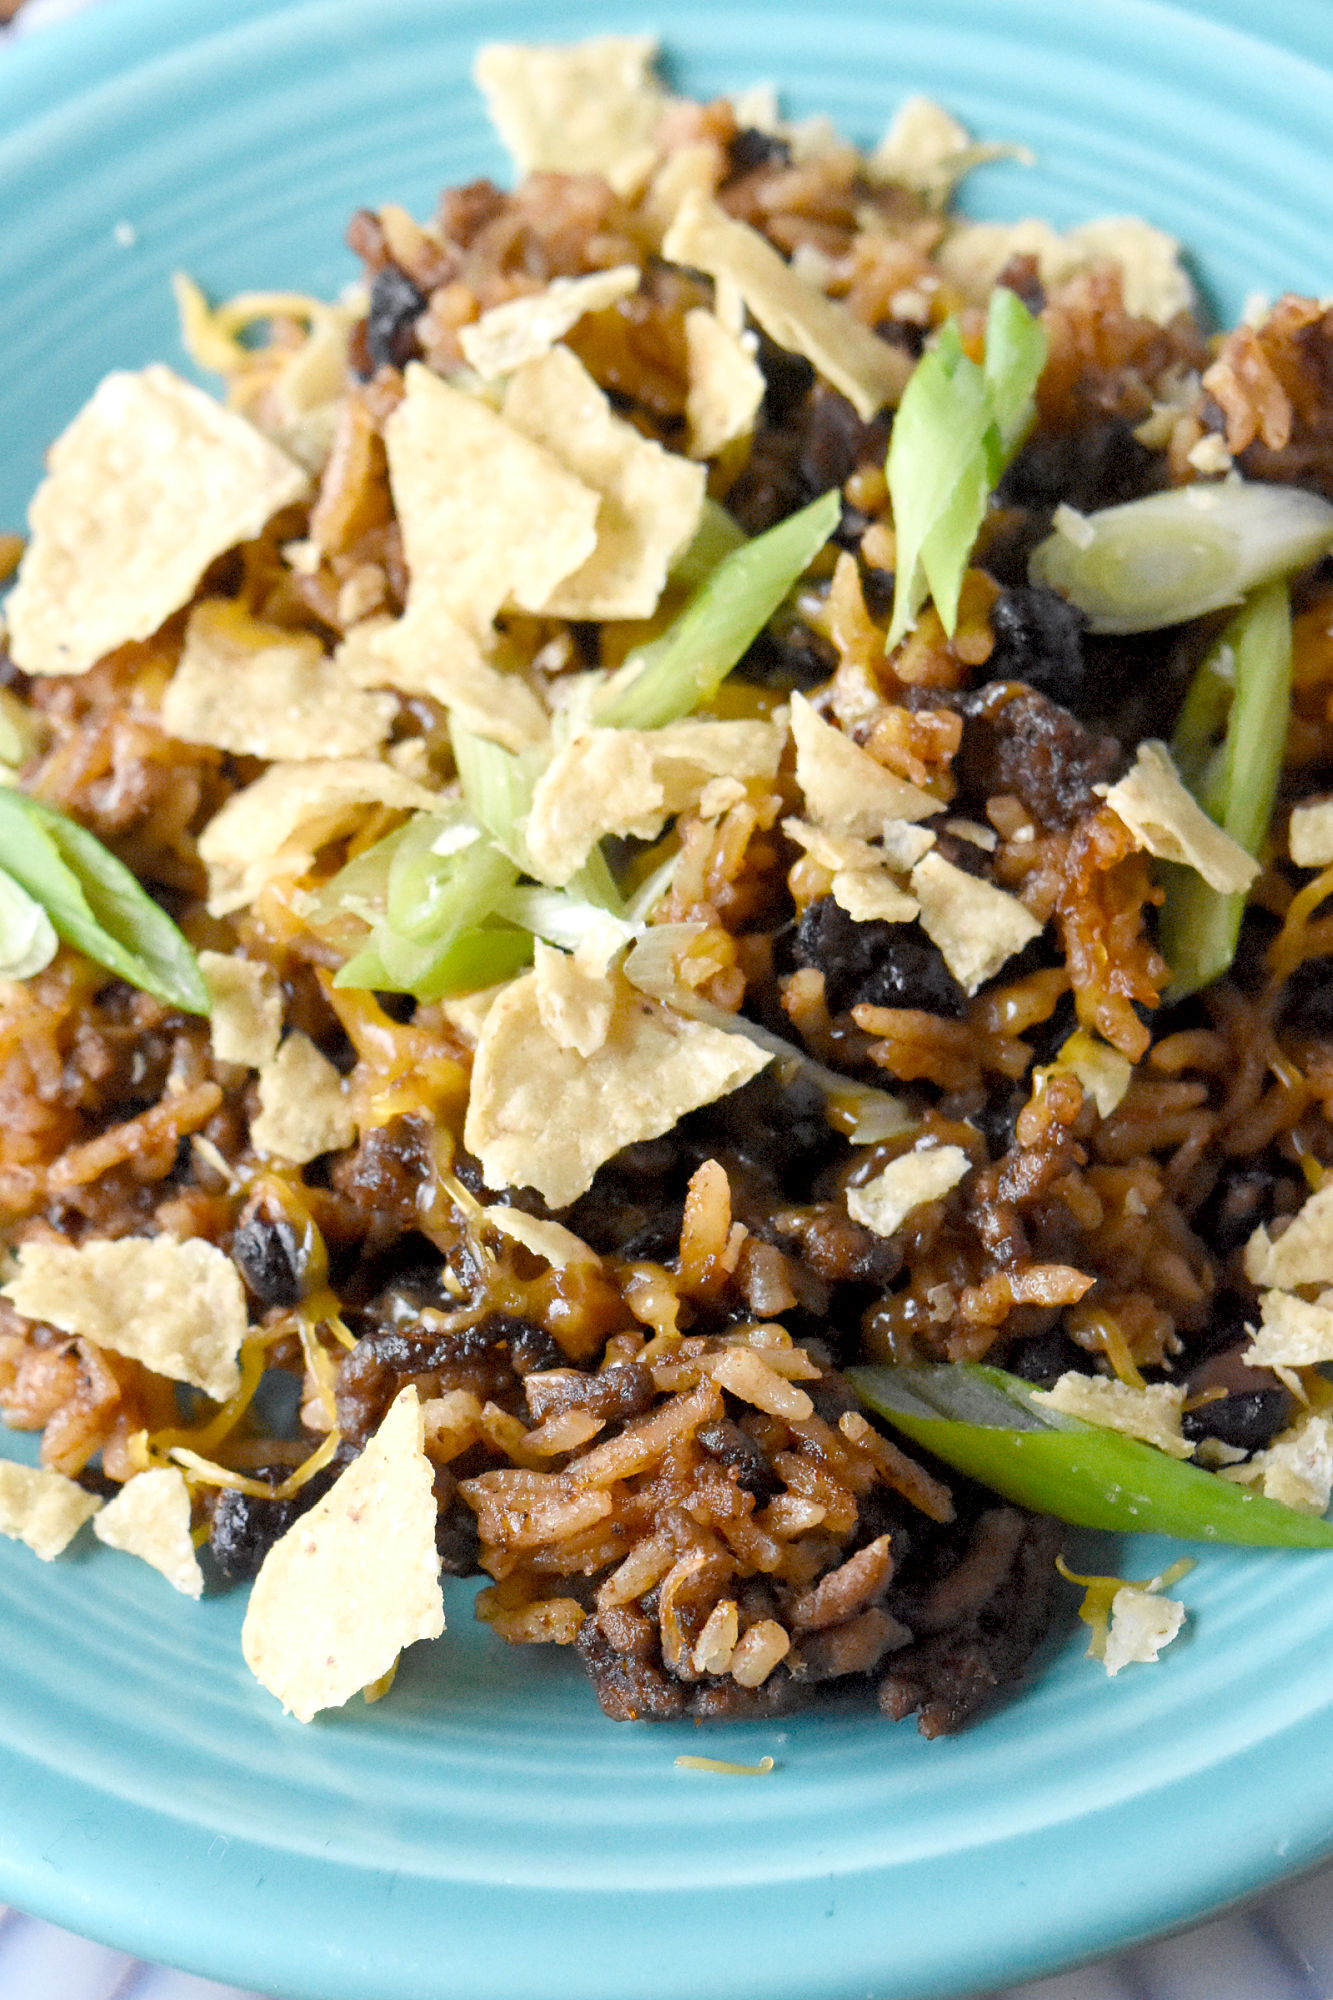 Looking for a new twist on traditional Mexican cuisine? Try out this Skillet Mexican Beef and Rice dish, packed with flavor and sure to please your taste buds! #MexicanRecipes #OnePanMeals #EasyDinnerIdeas #BeefAndRice #SkilletCooking 🍴🌶 #MexicanFlavors #BeefAndRice
